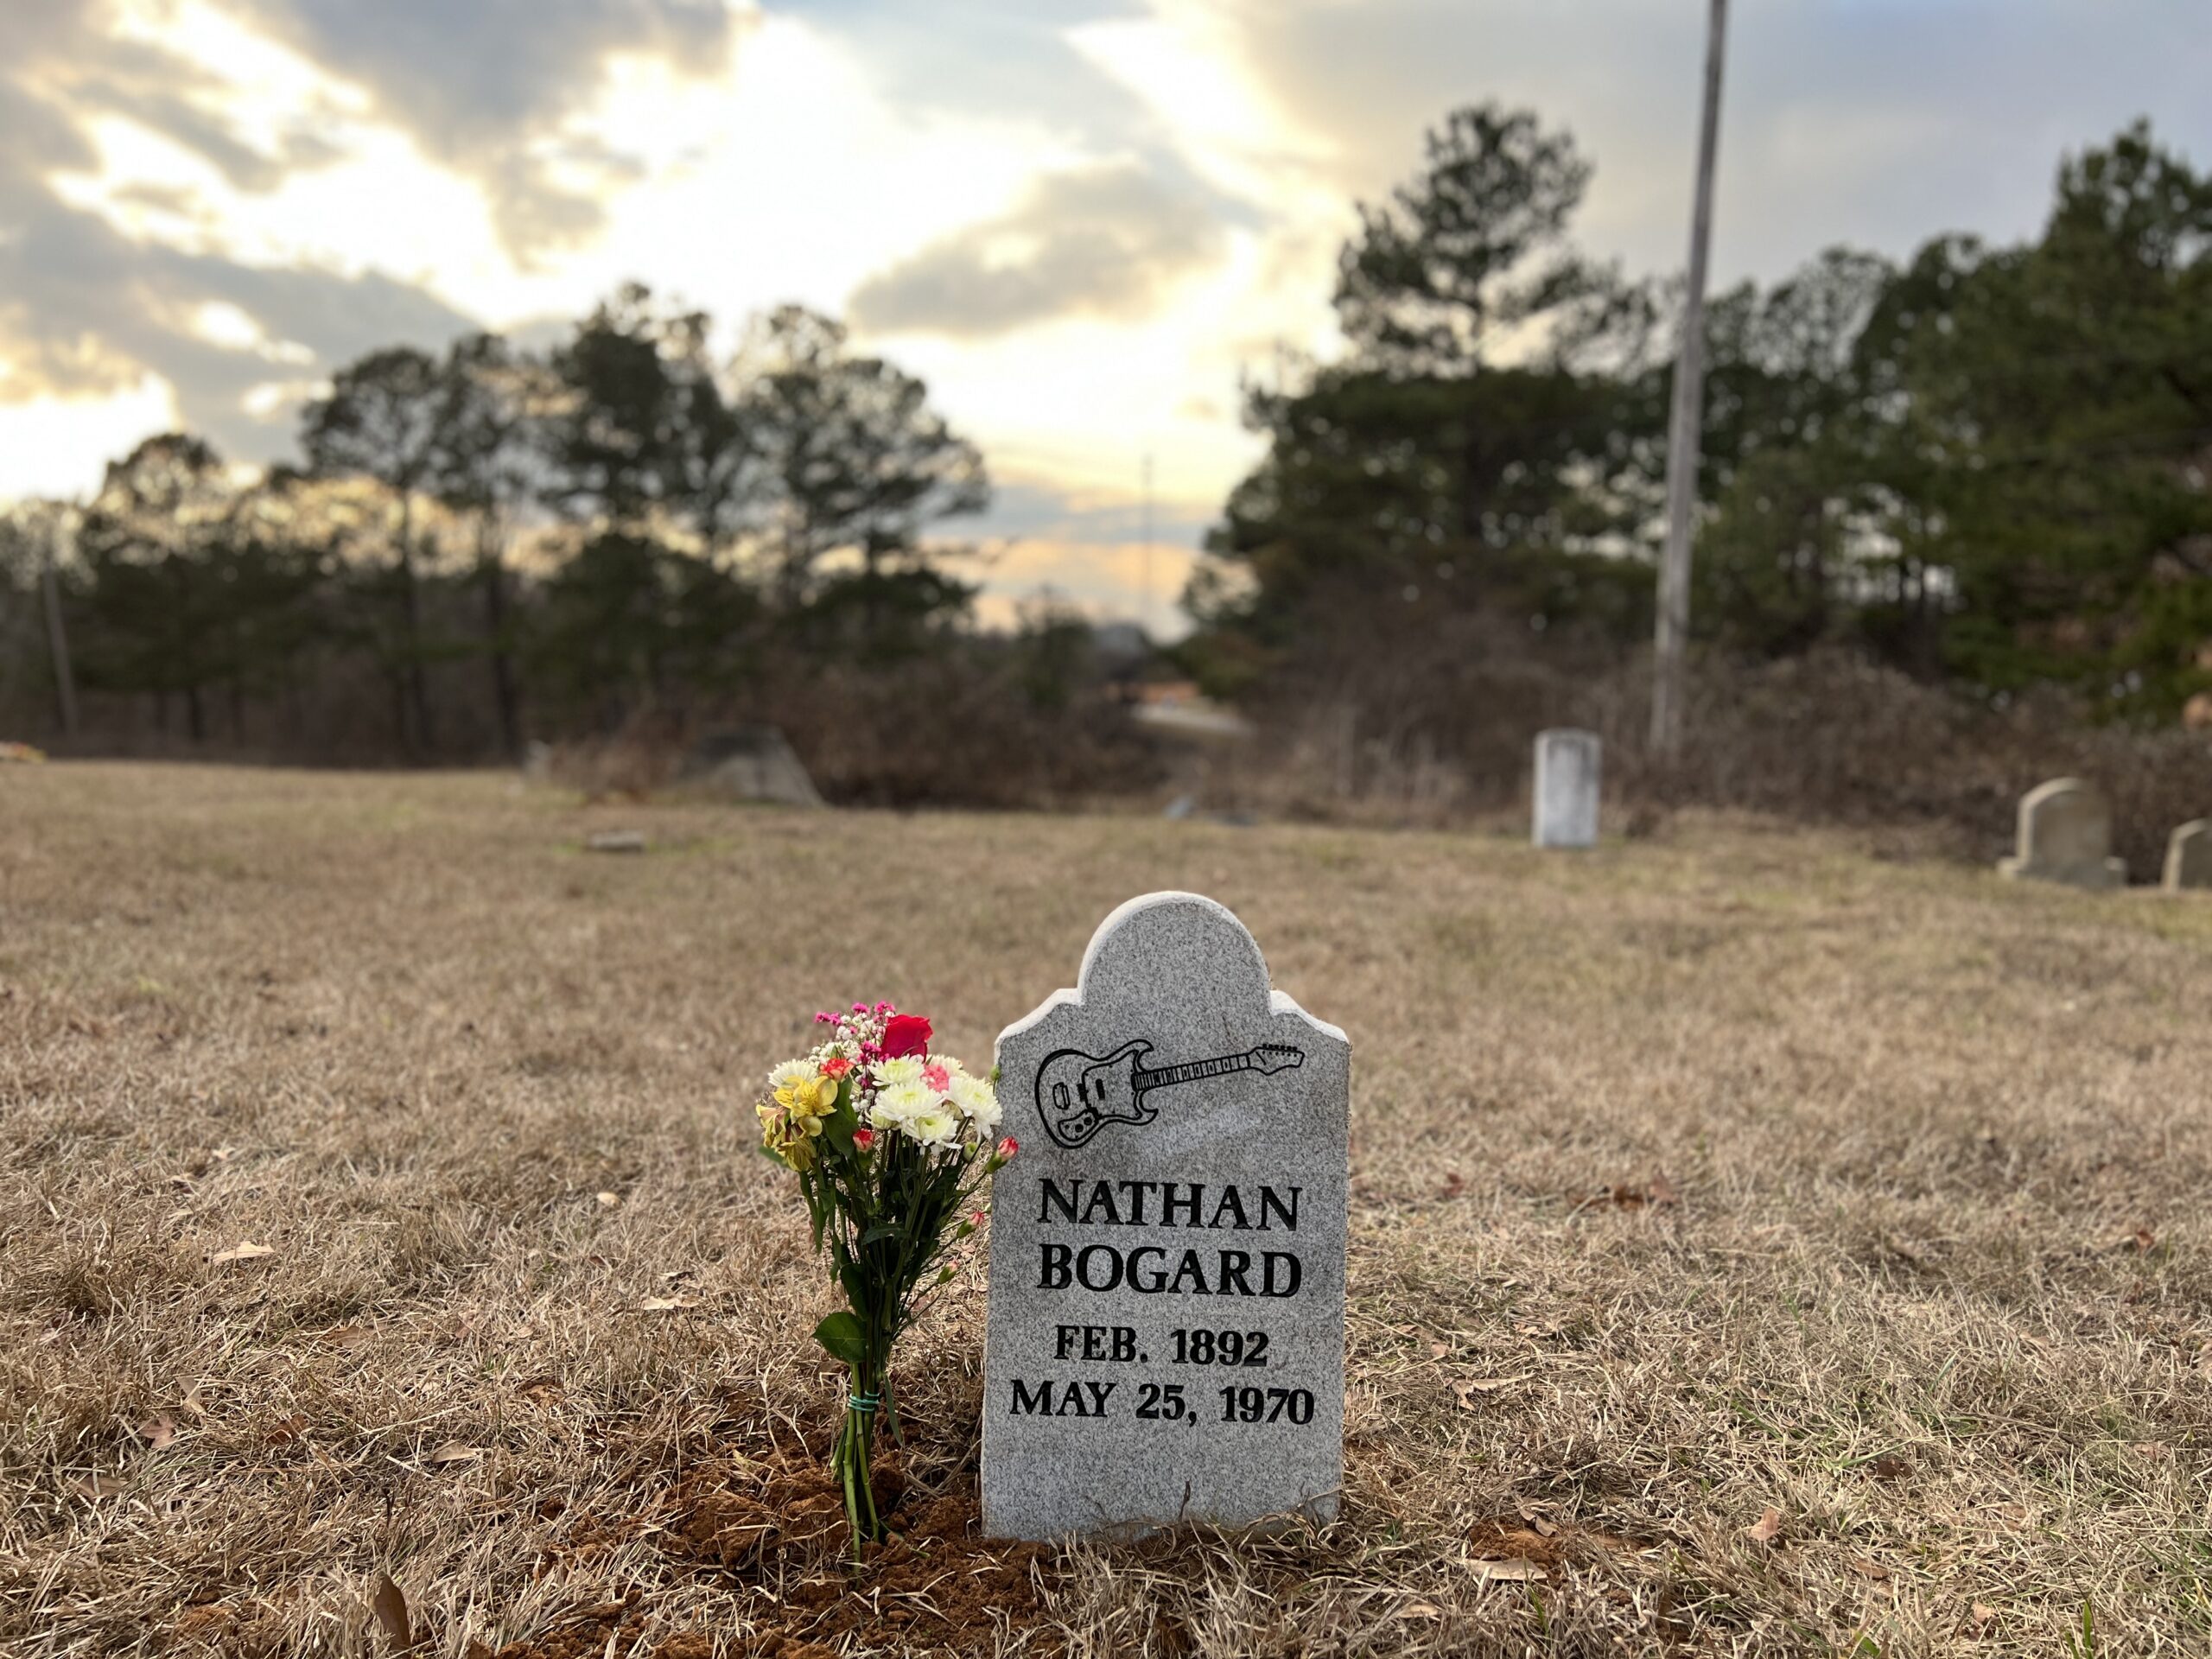 The headstone of Nathan Beauregard at Shiloh MB Church in Ashland, MS. The line drawing for the Kingston Swinga guitar was done by Gary Tennant, and master engraver, Alan Orlicek, fabricated the marker.